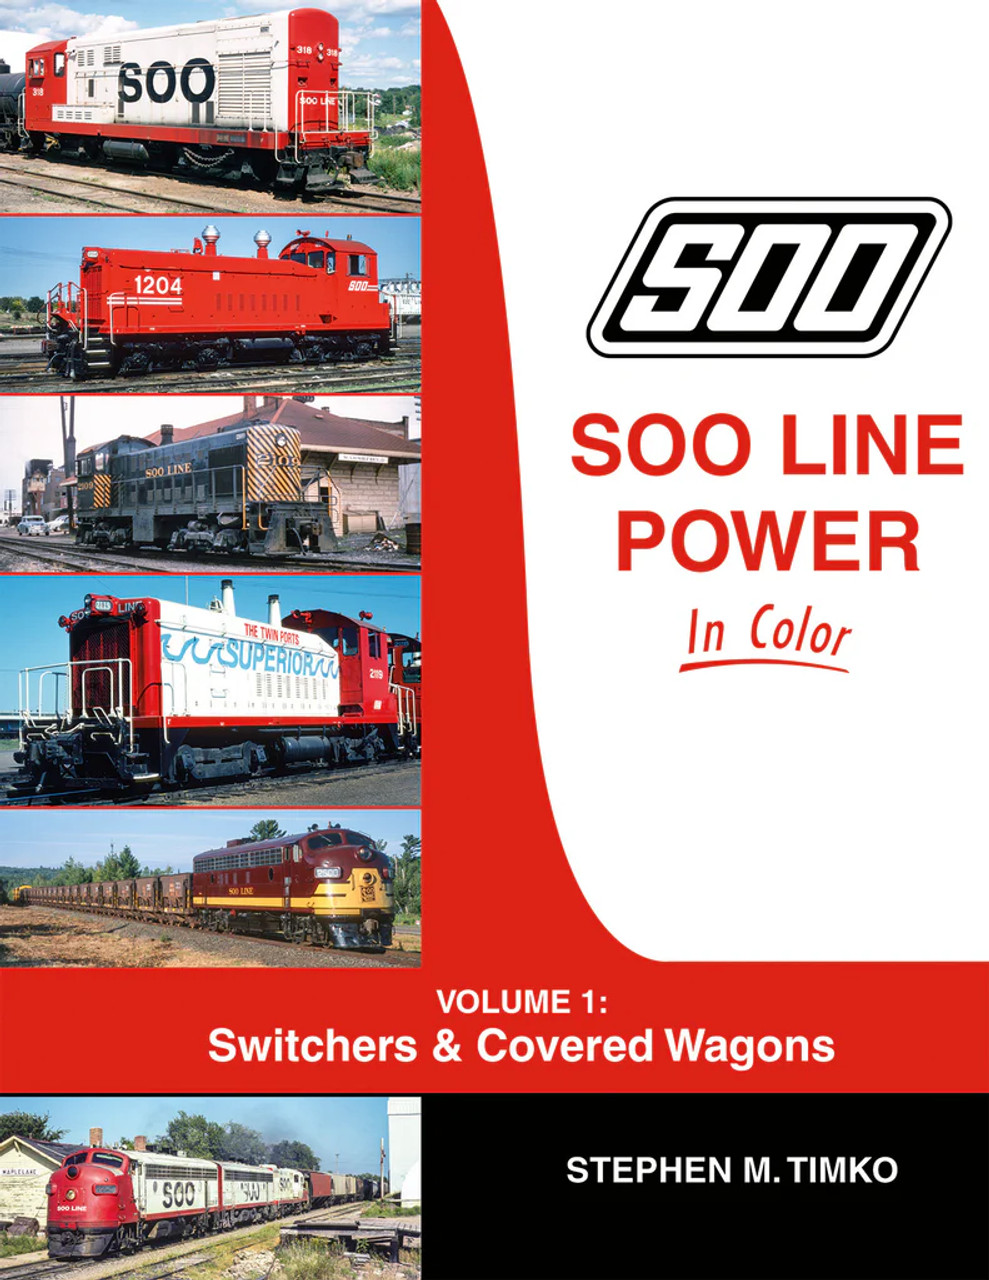 Morning Sun 1736 Soo Line Power In Color Volume 1: Switchers & Covered Wagons